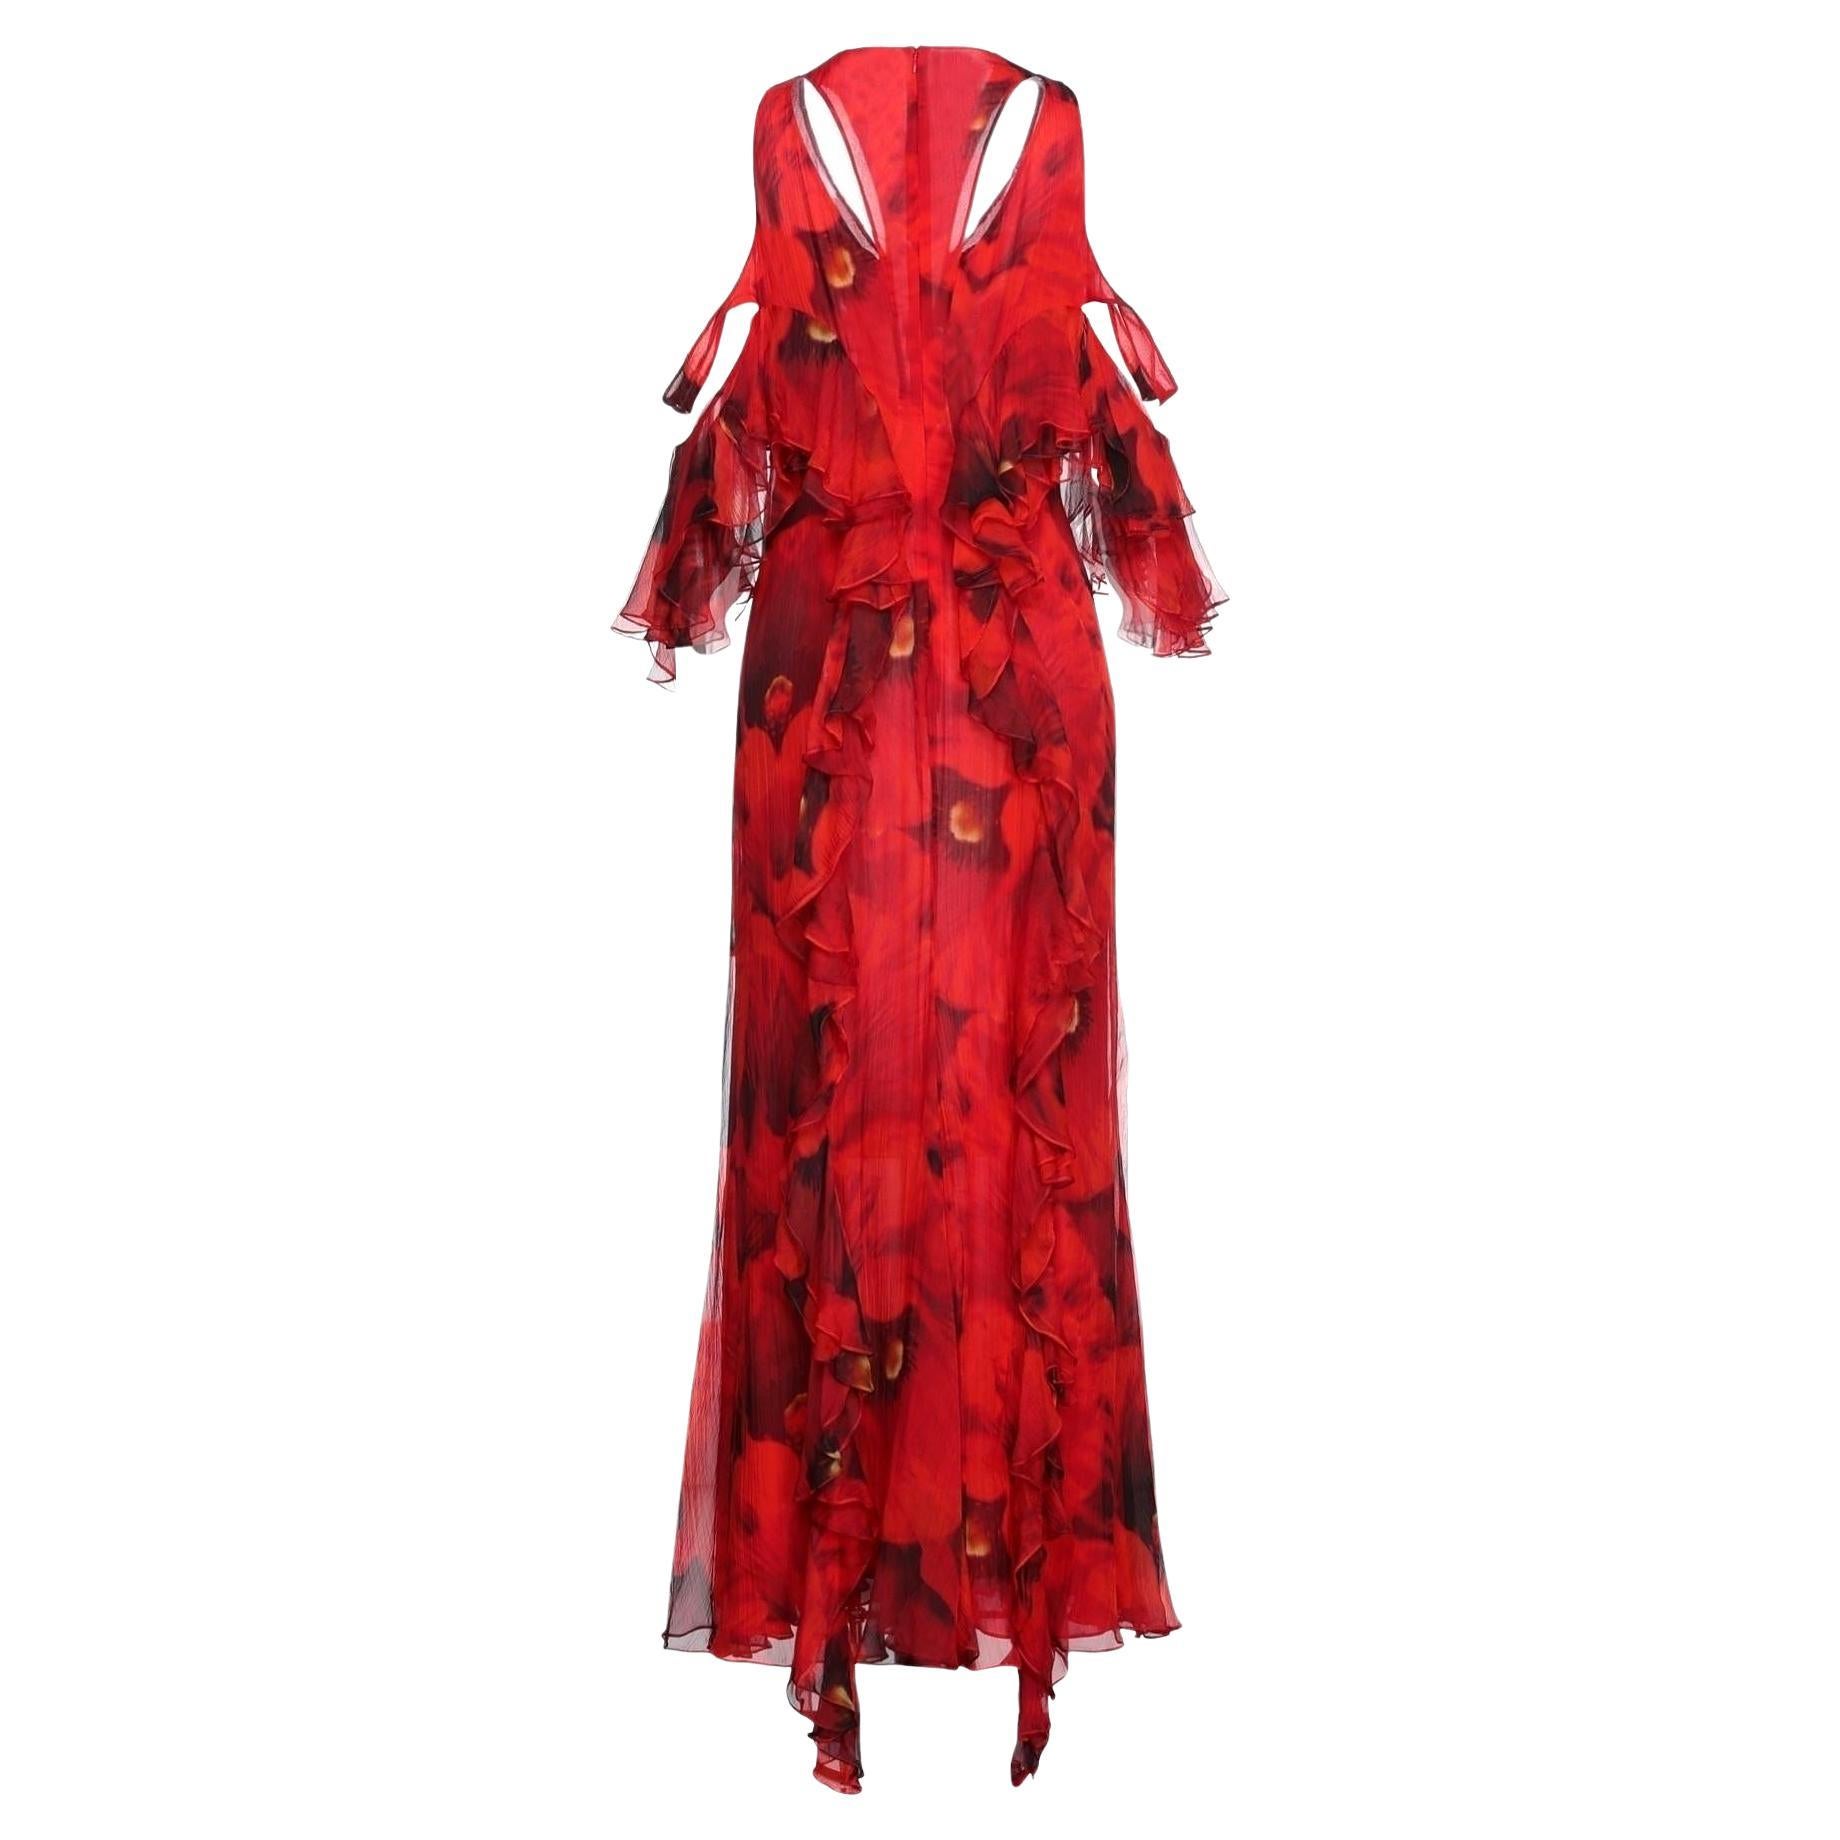 ALEXANDER MCQUEEN
Cold-Shoulder Floral Print Silk-Chiffon Maxi Dress
It Size 44 - US 8
New, with tags.